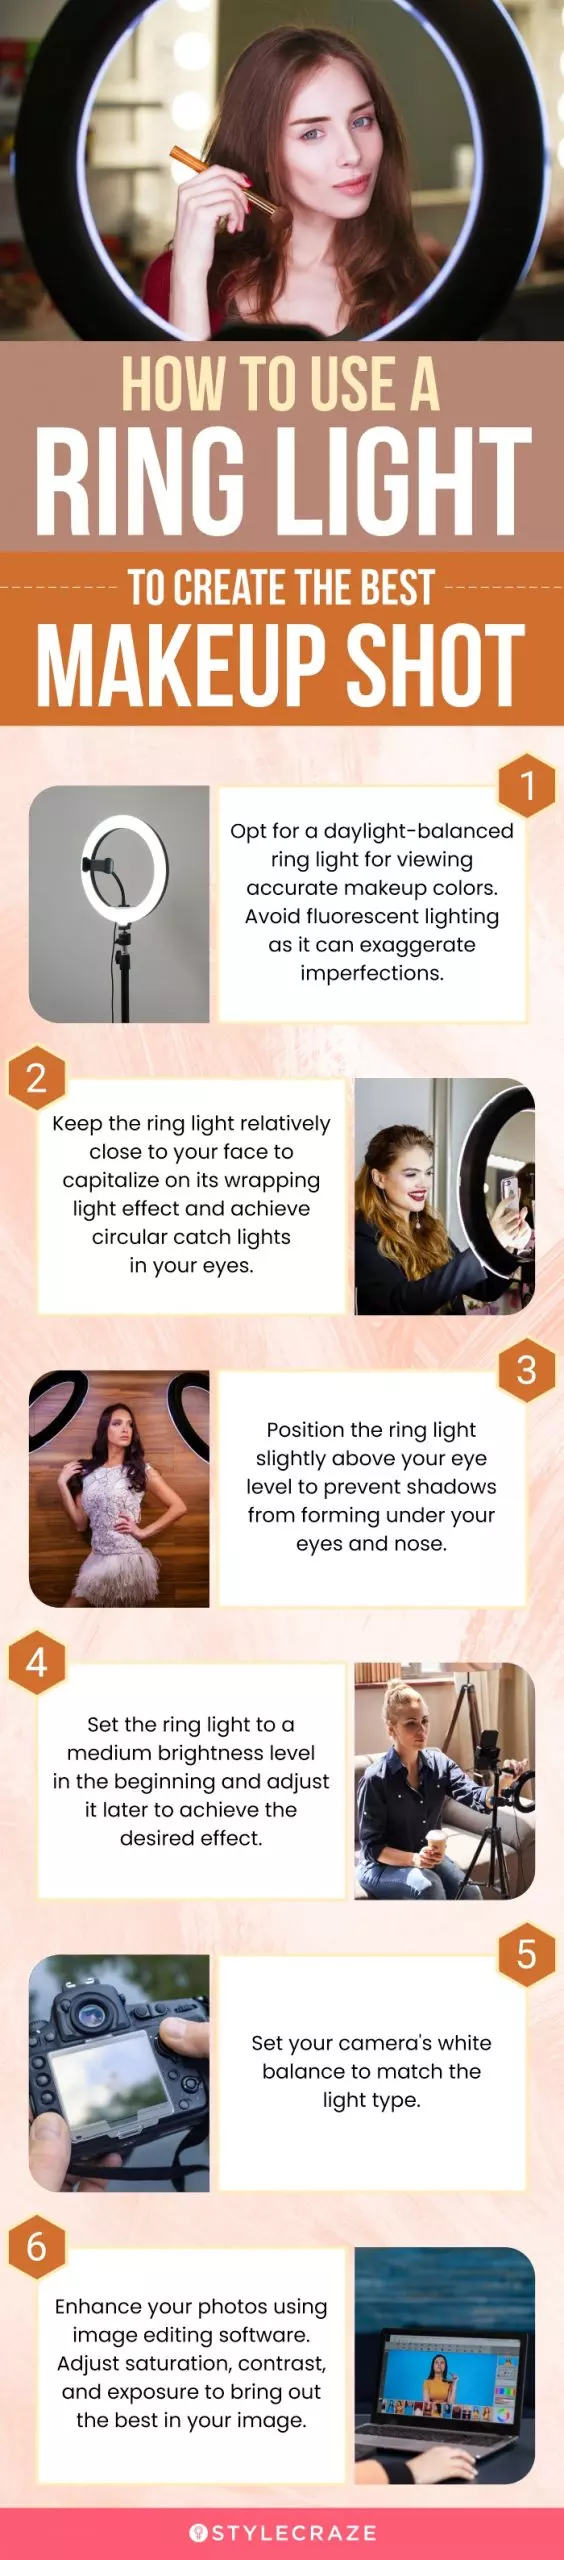 How To Use A Ring Light To Create The Best Makeup Shot (infographic)